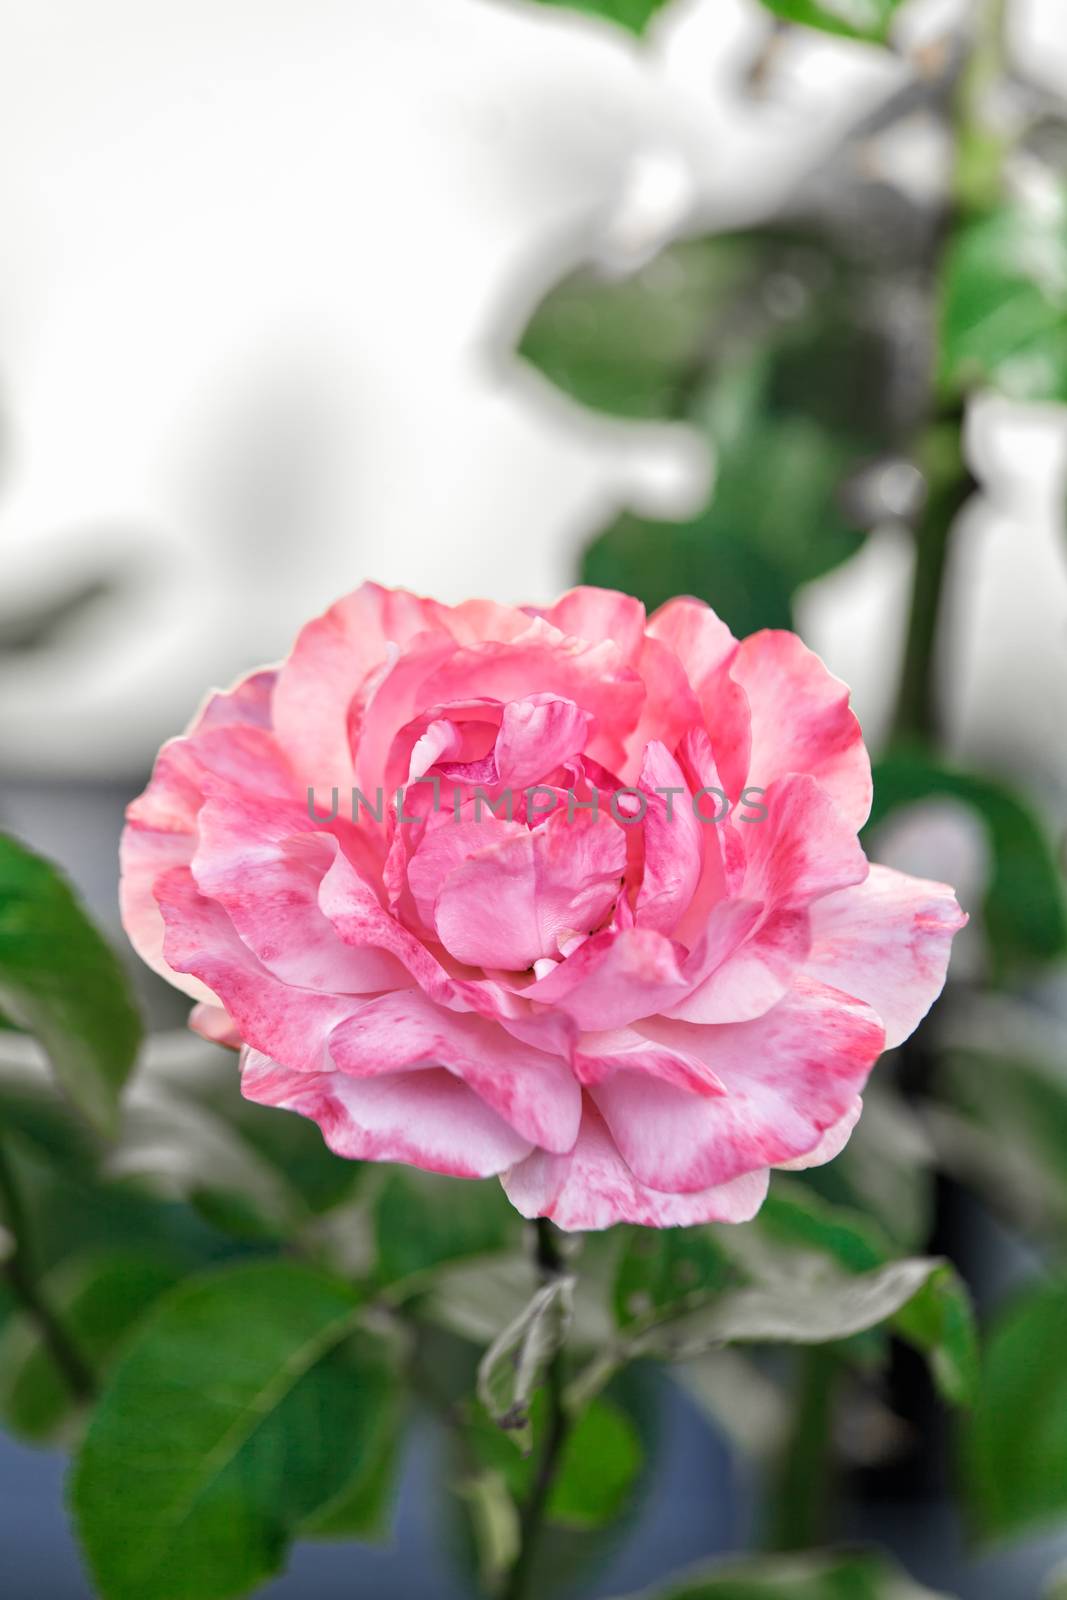 Single pink rose in a garden by STphotography